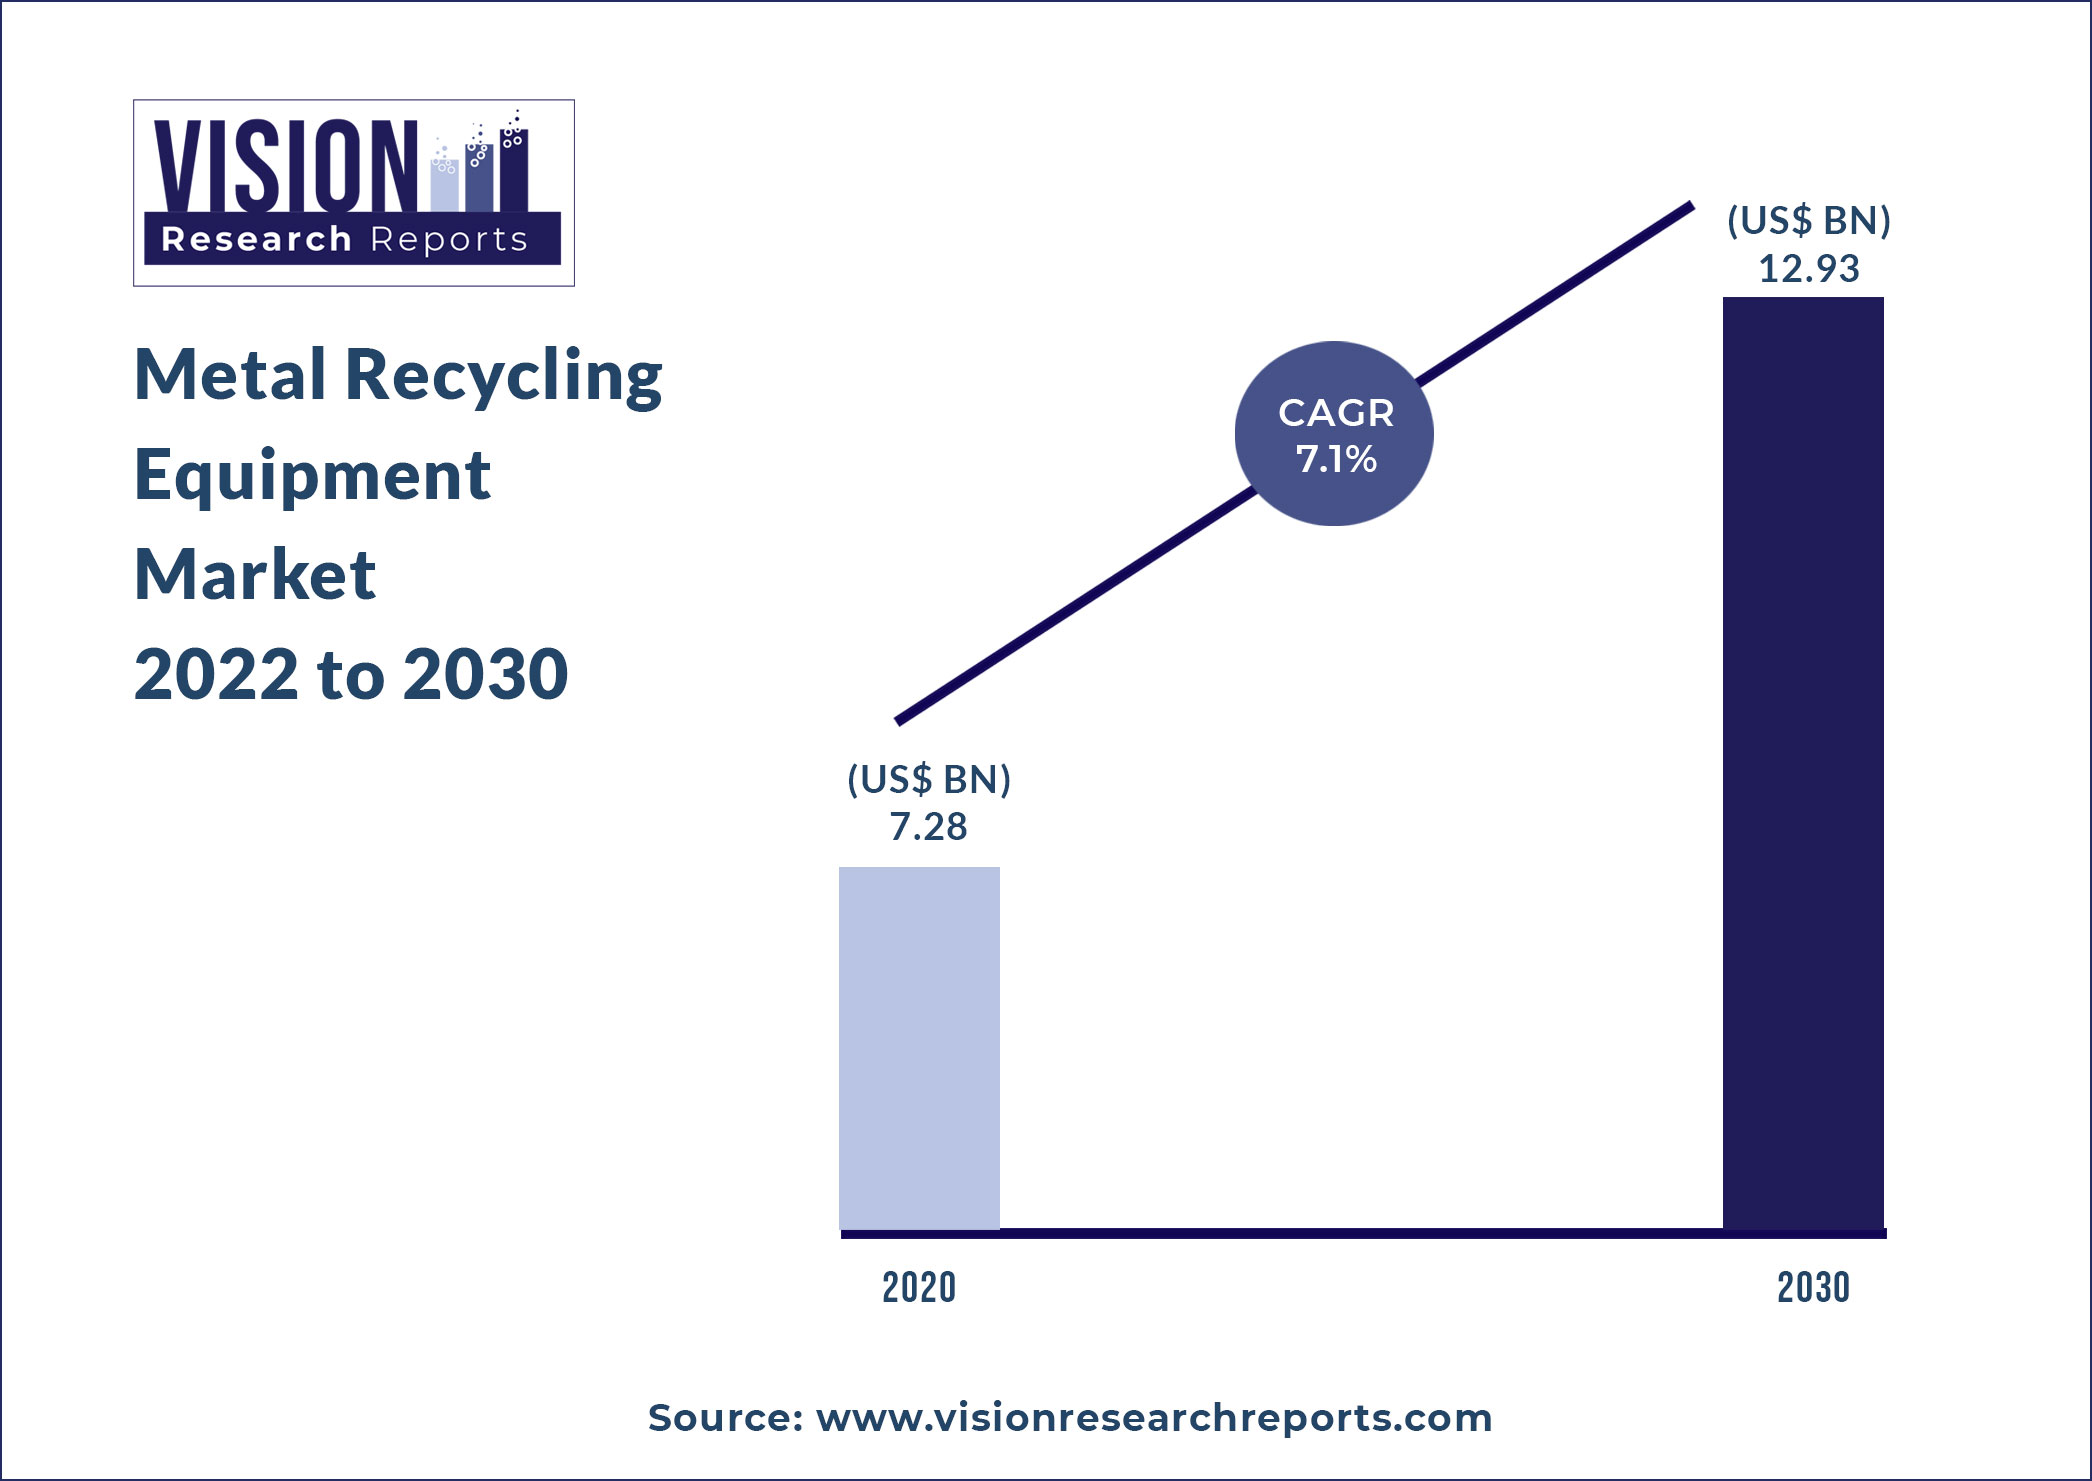 Metal Recycling Equipment Market Size 2022 to 2030